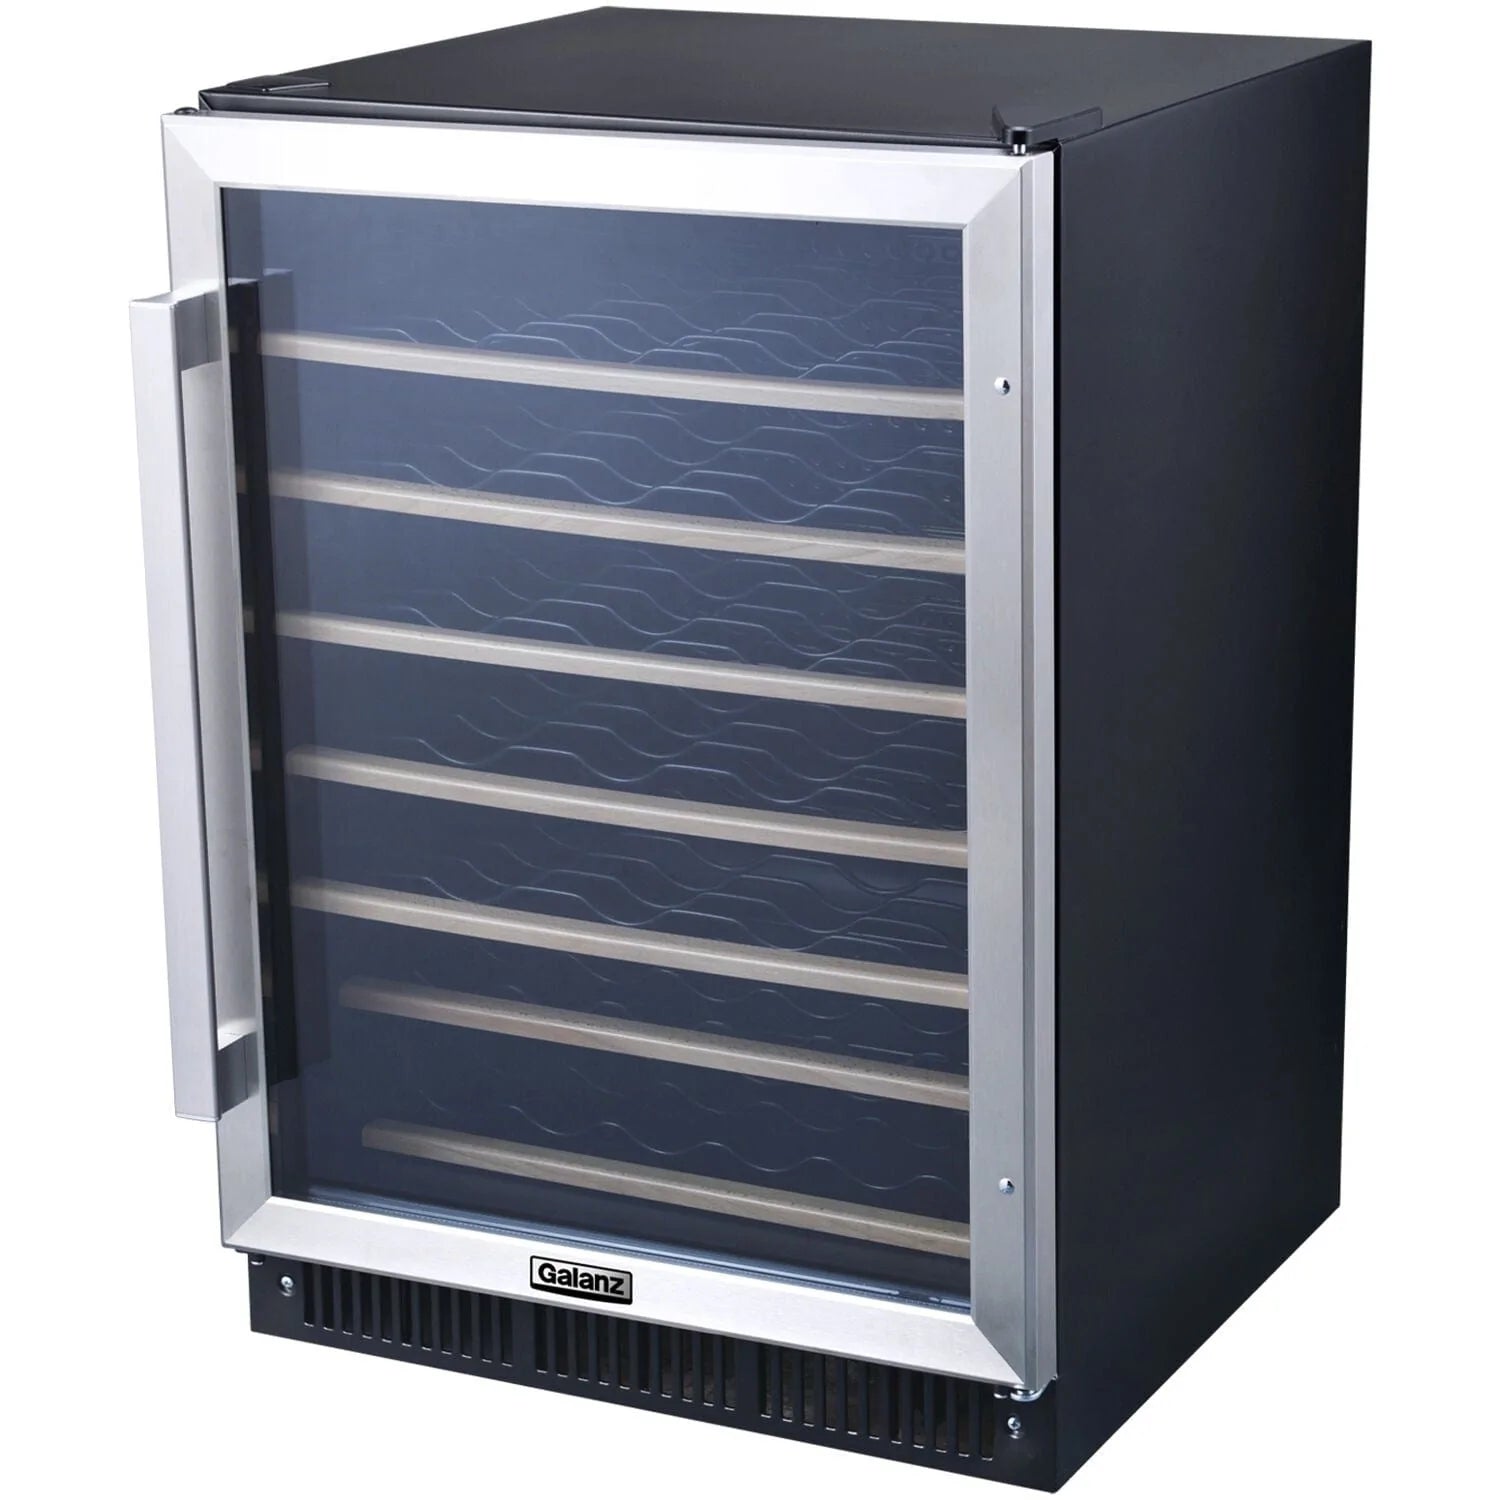 Galanz 24 in. 47-Bottle Built-In Wine Cooler in Stainless Steel (GLW57MS2B16)